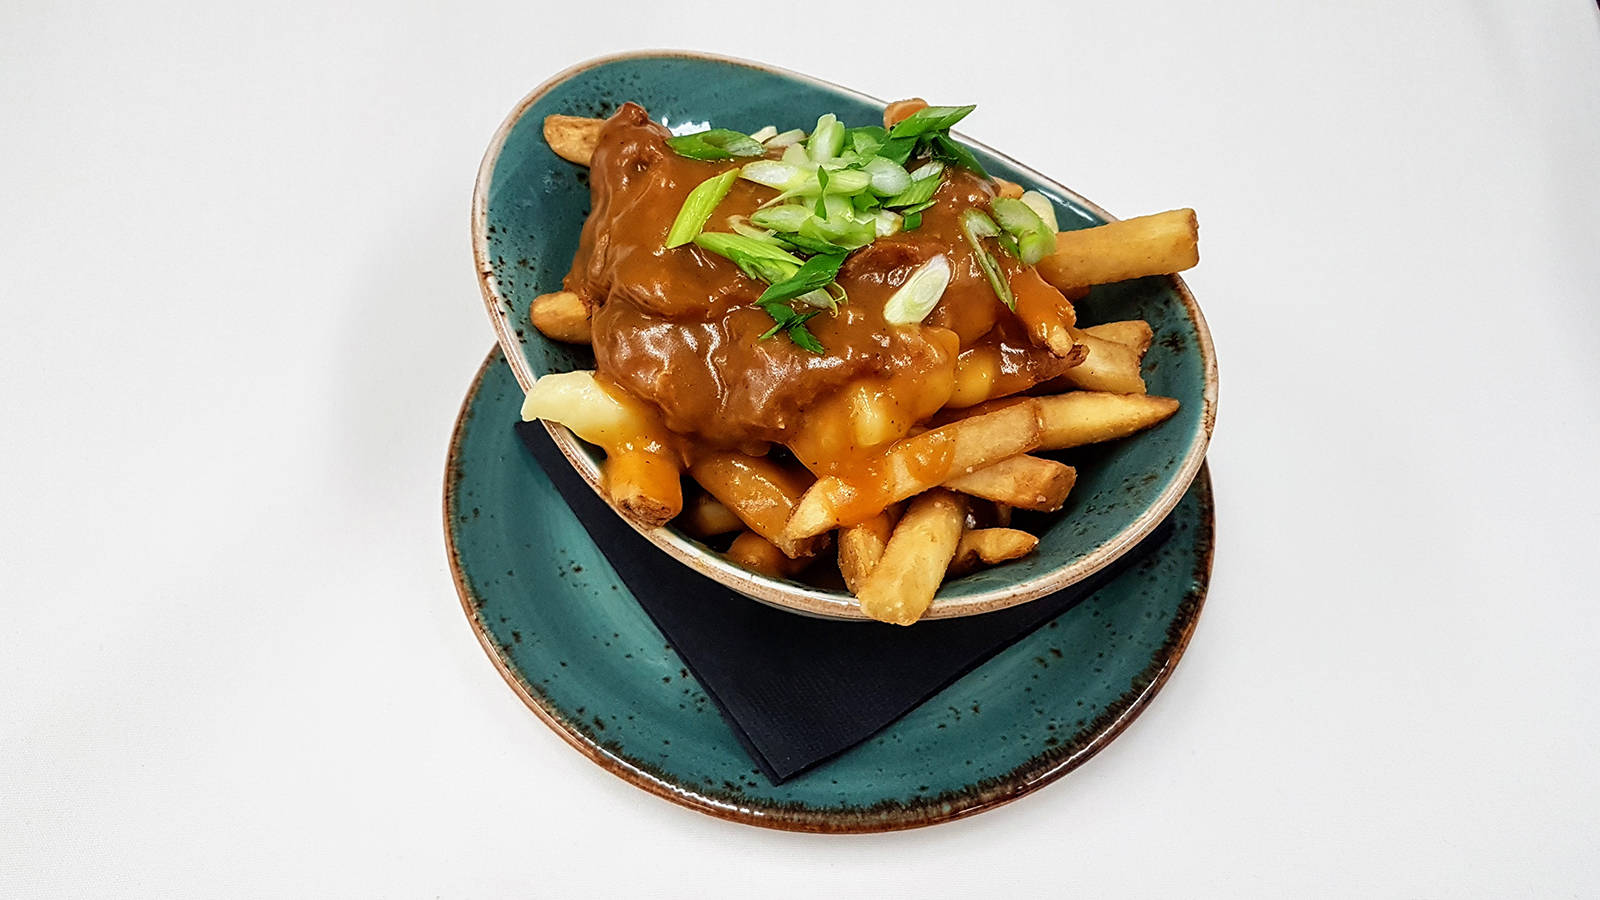 For Mealshares annual Poutine with Purpose event, LURE Restaurant and Bar presents its Pulled Pork Poutine – house-smoked pulled pork, Kennebec fries tossed with fresh Armstrong, B.C. cheese curds, finished with Lures chicken-duck gravy.